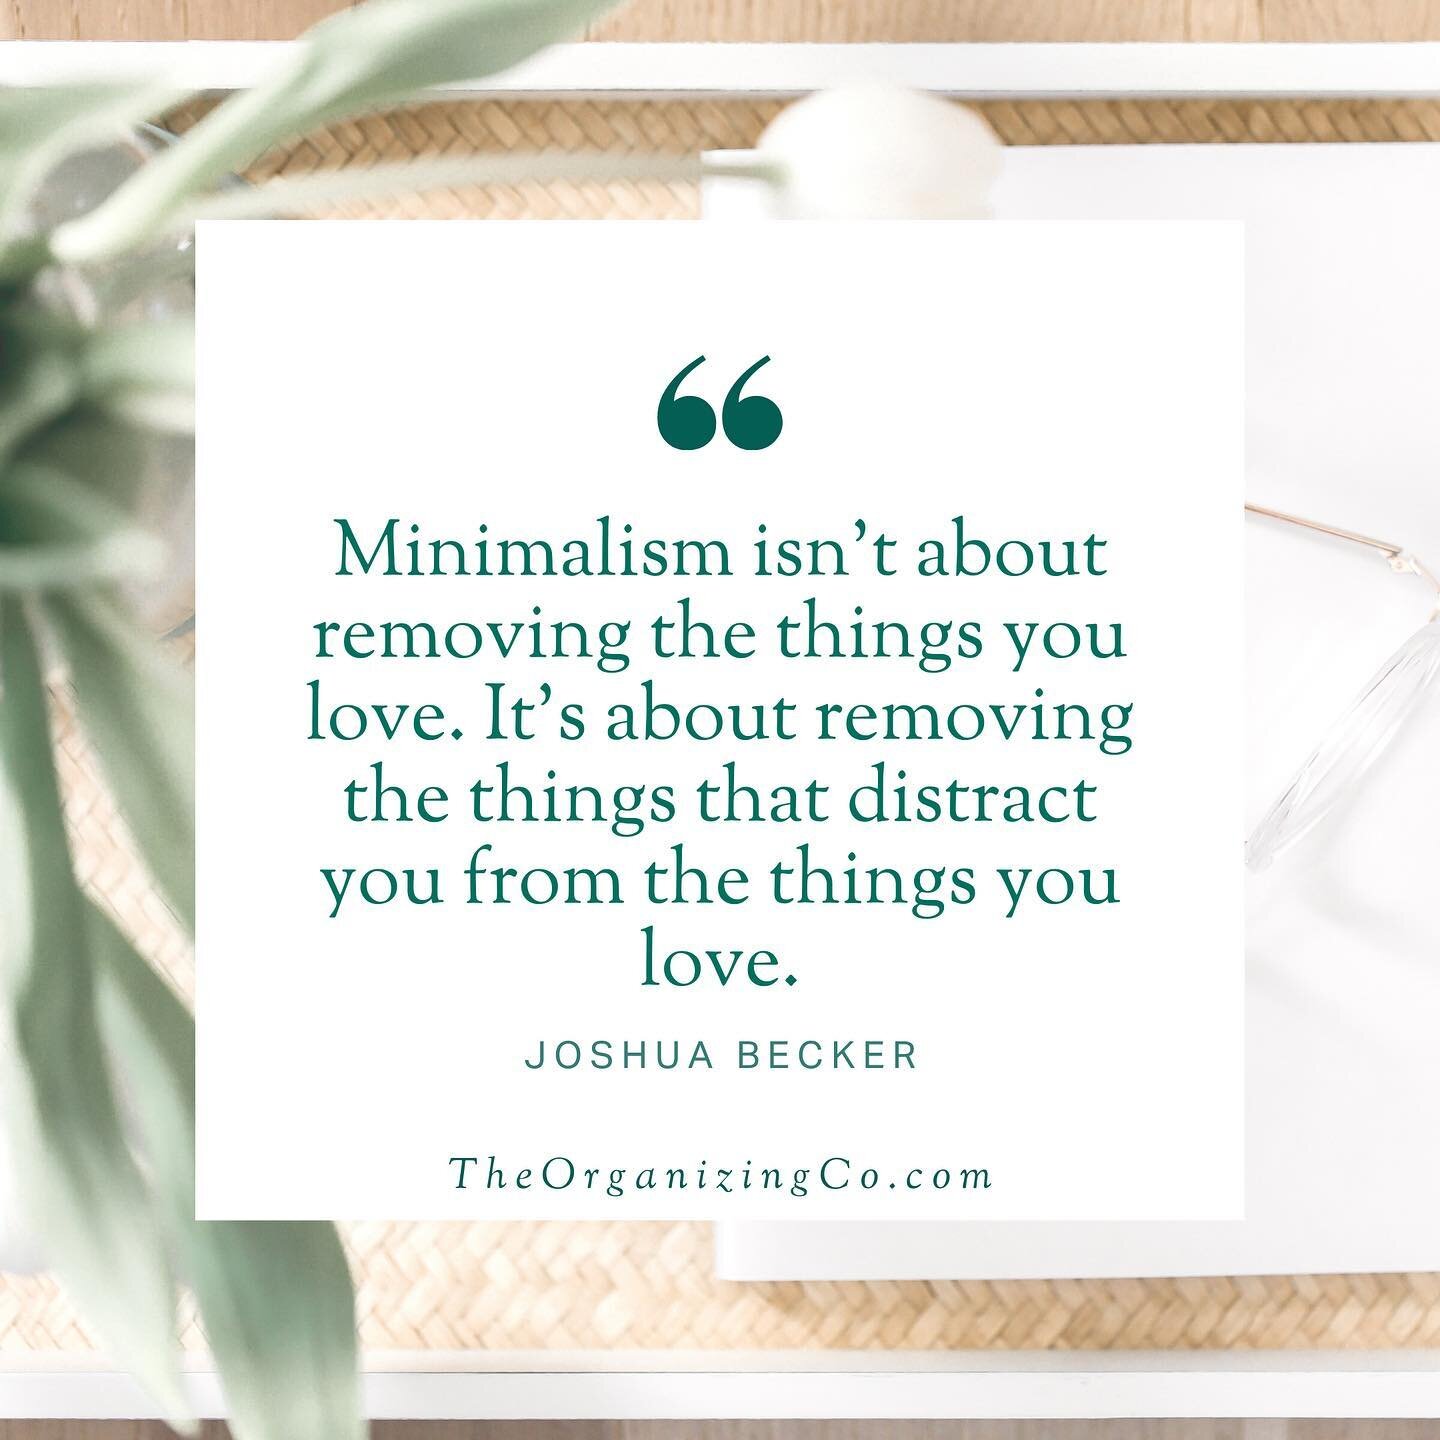 I don&rsquo;t think there&rsquo;s much I can add to this quote! I&rsquo;m not a minimalist personally, but I do believe in intentionality and purpose. Adopting the mindset that the things in our home shouldn&rsquo;t distract us from the things (or pe